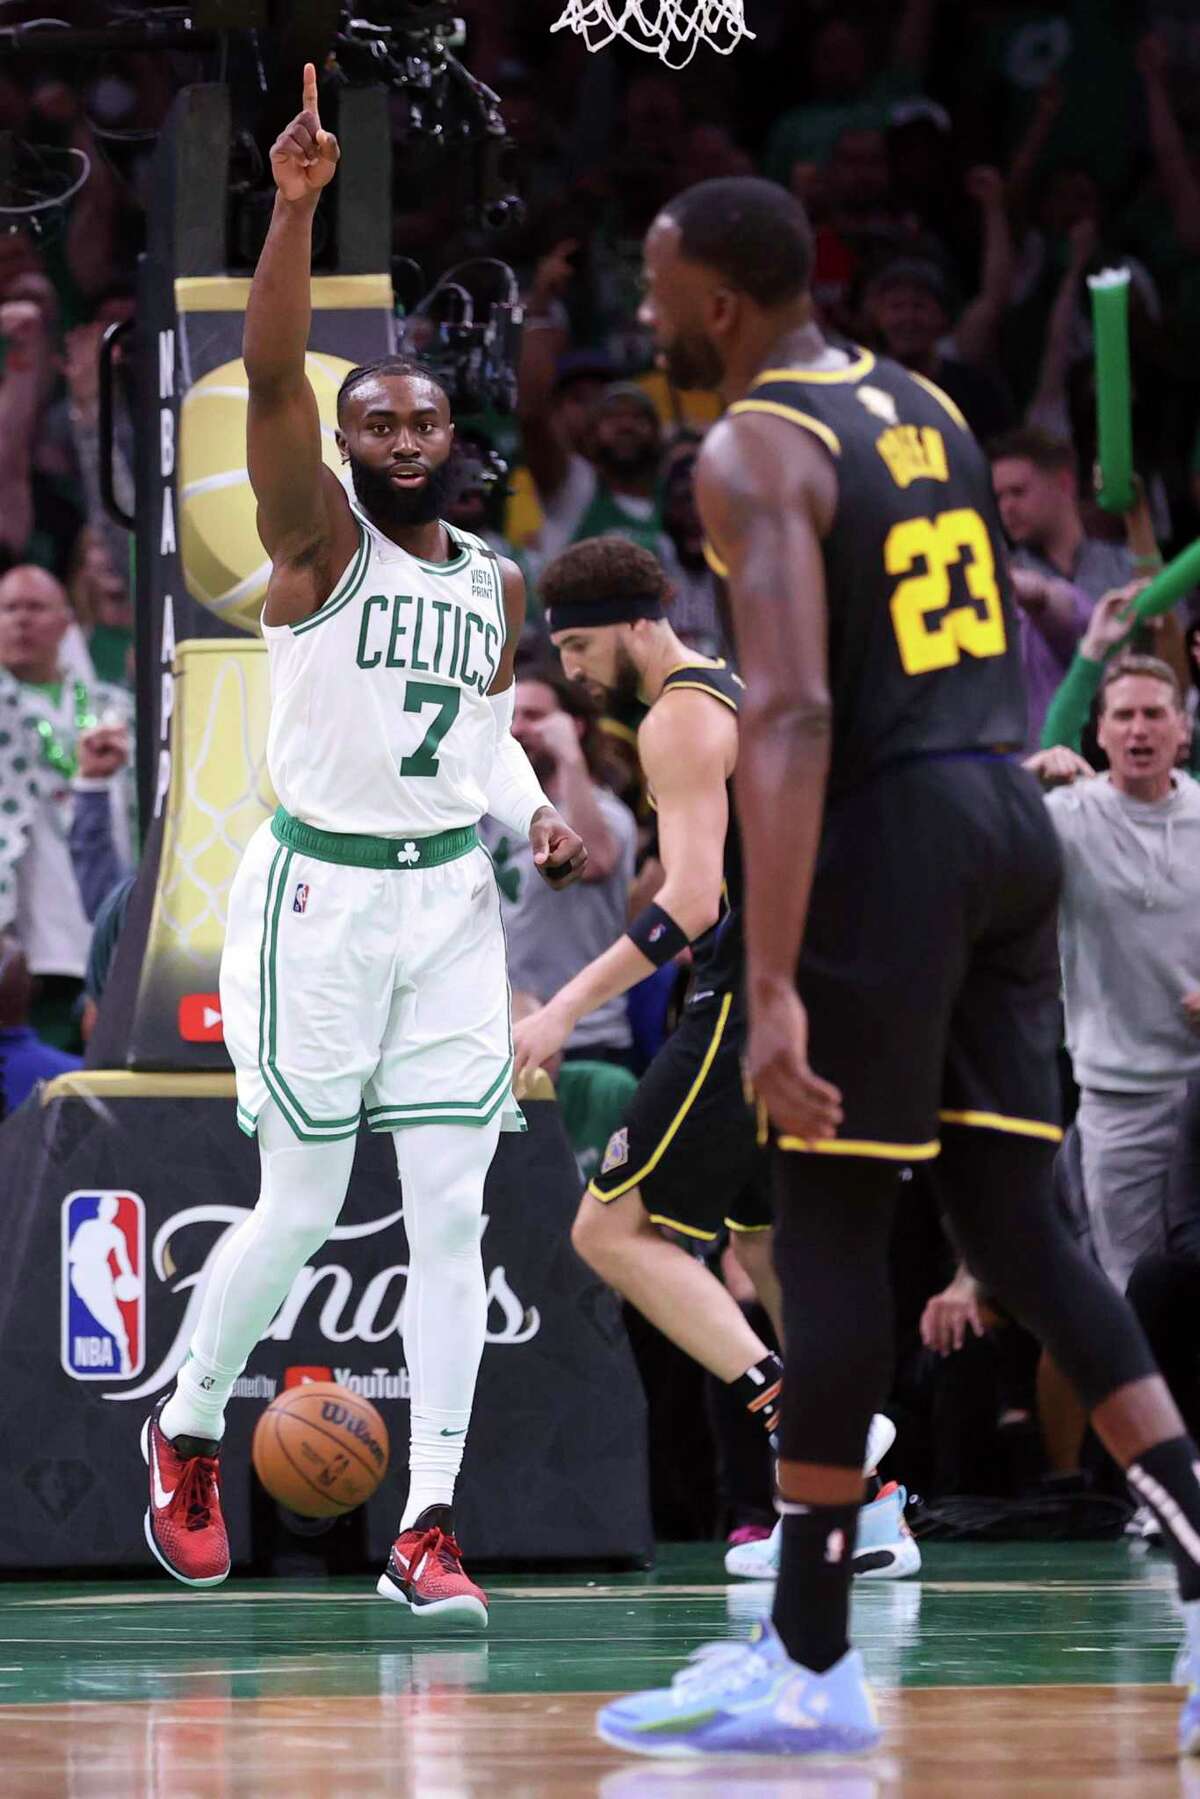 Jaylen Brown and the Celtics face Draymond Green and the Warriors in Game 4 of the NBA Finals in Boston at 6 p.m. Friday (Channel 7, Channel 10/95.7).